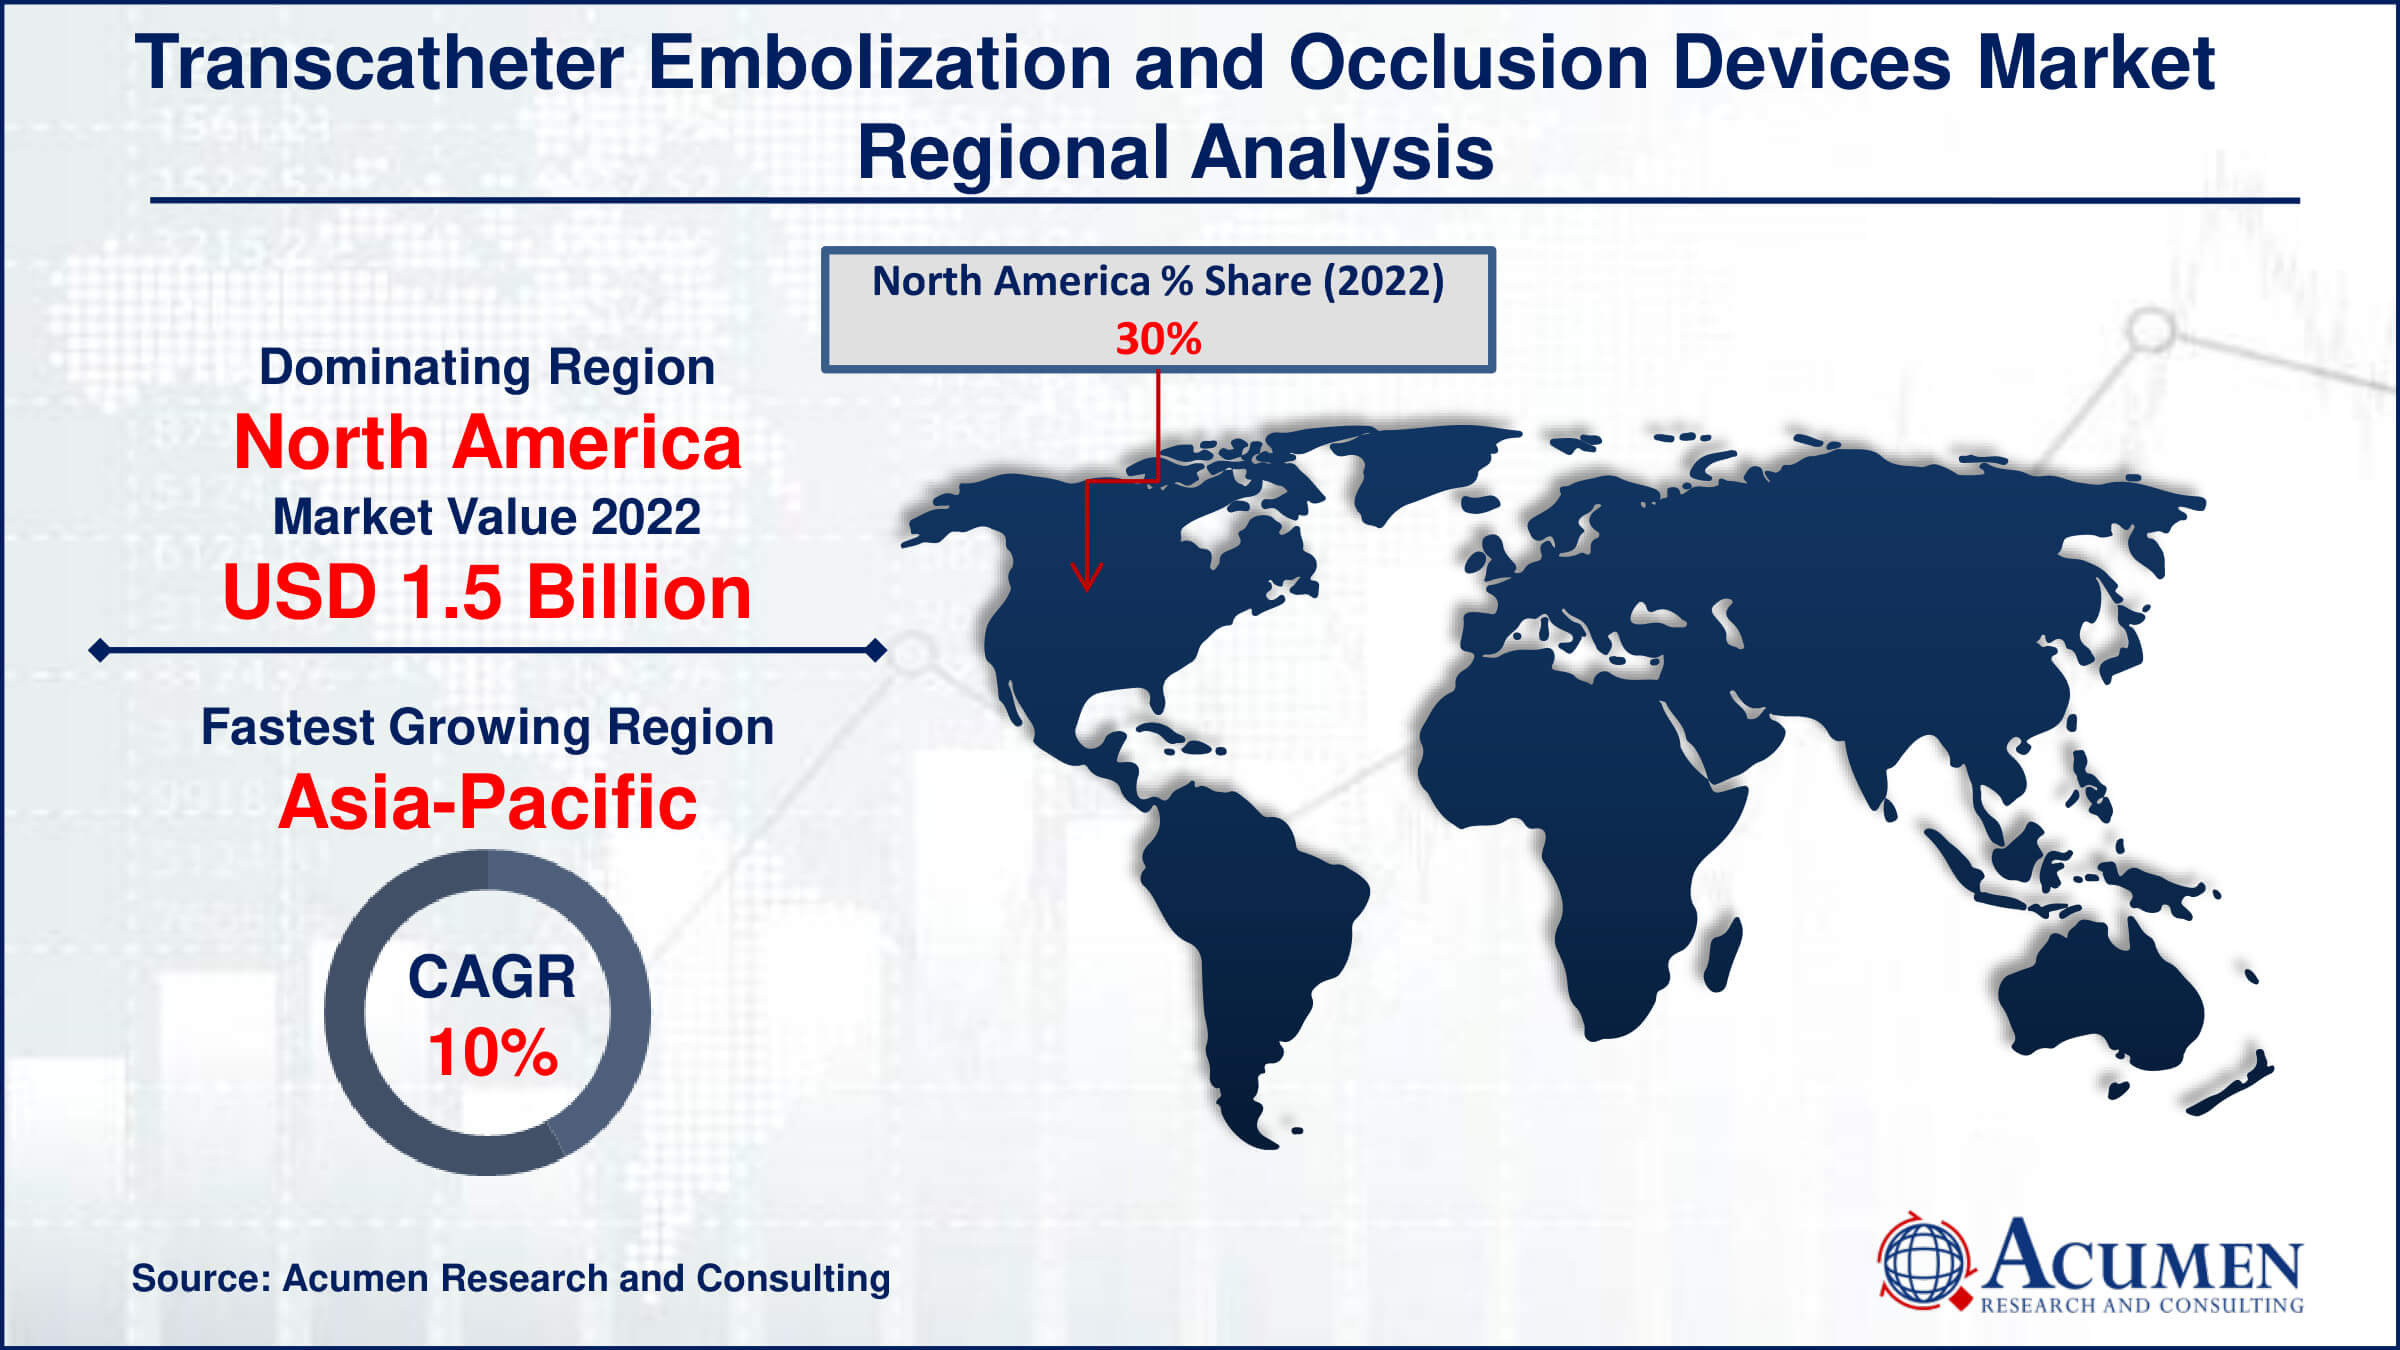 Transcatheter Embolization and Occlusion Devices Market Drivers